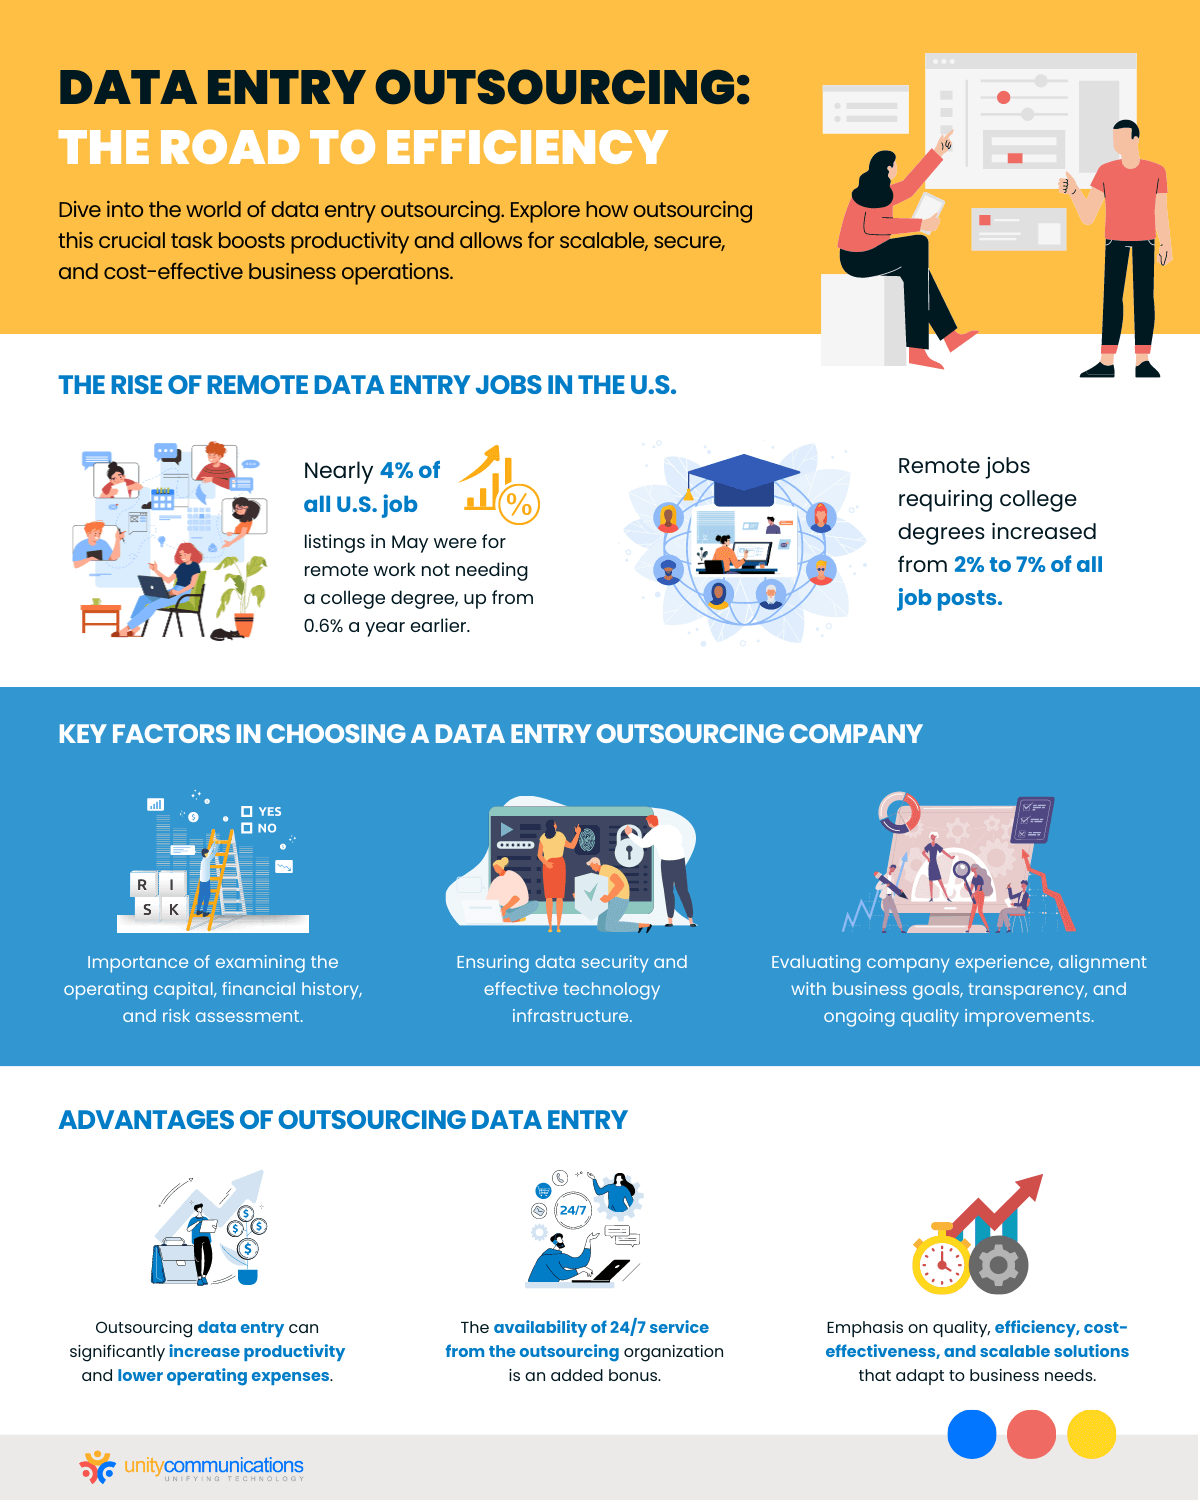 How to choose data entry outsourcing provide - Infographic Road to Efficiency